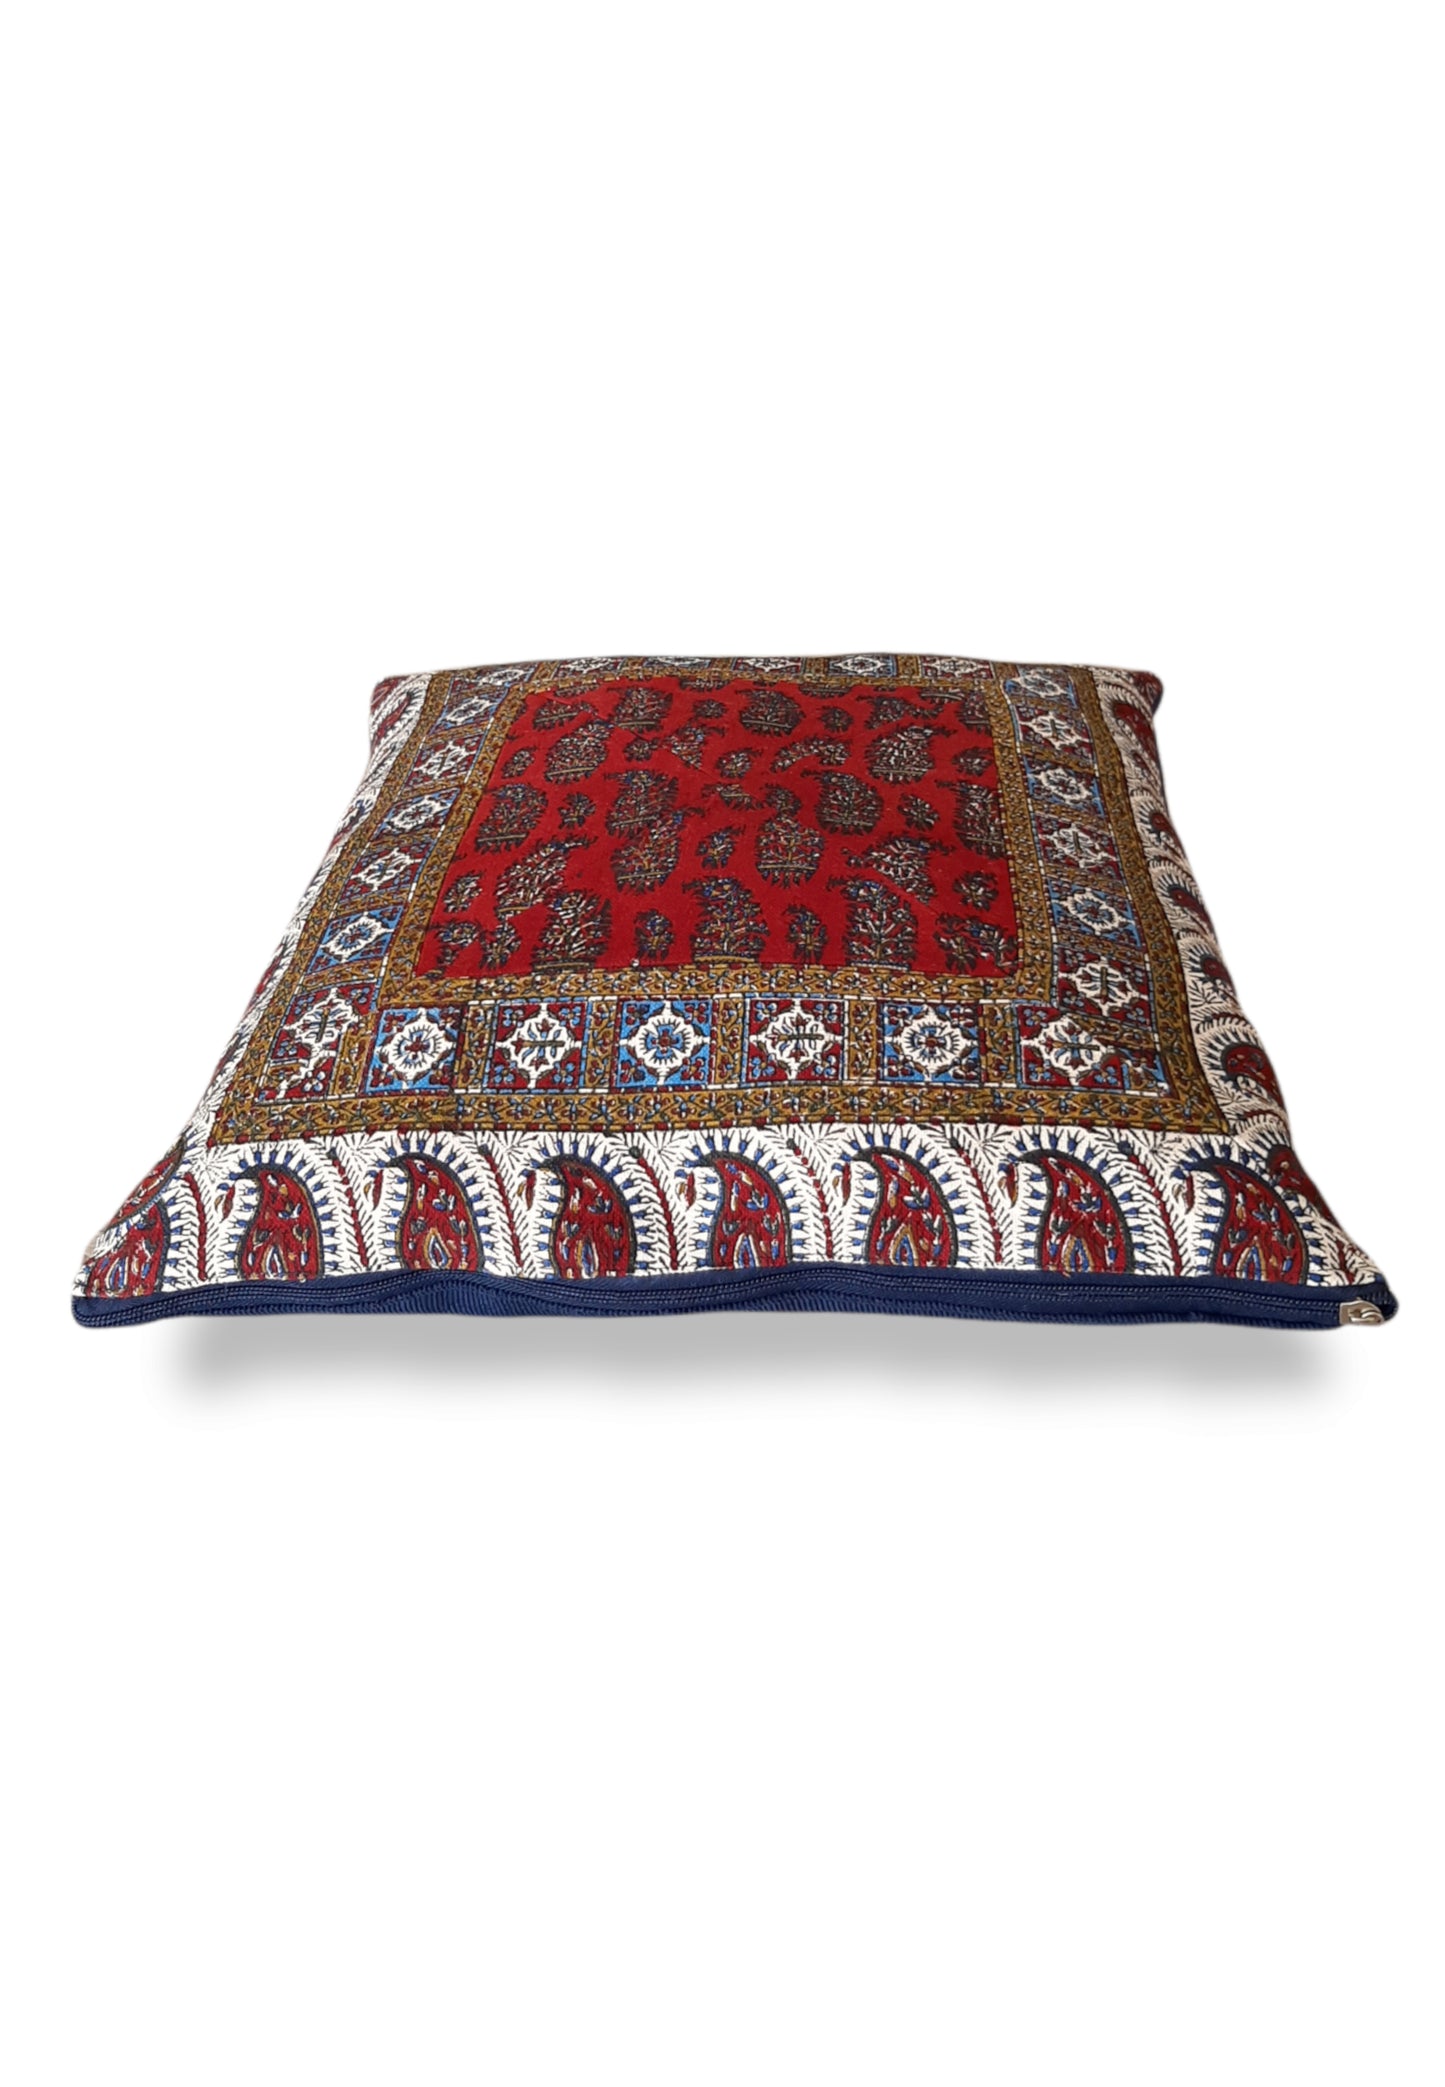 AFROZAN Hand-printed Cushion Cover - Multicolour-Red01